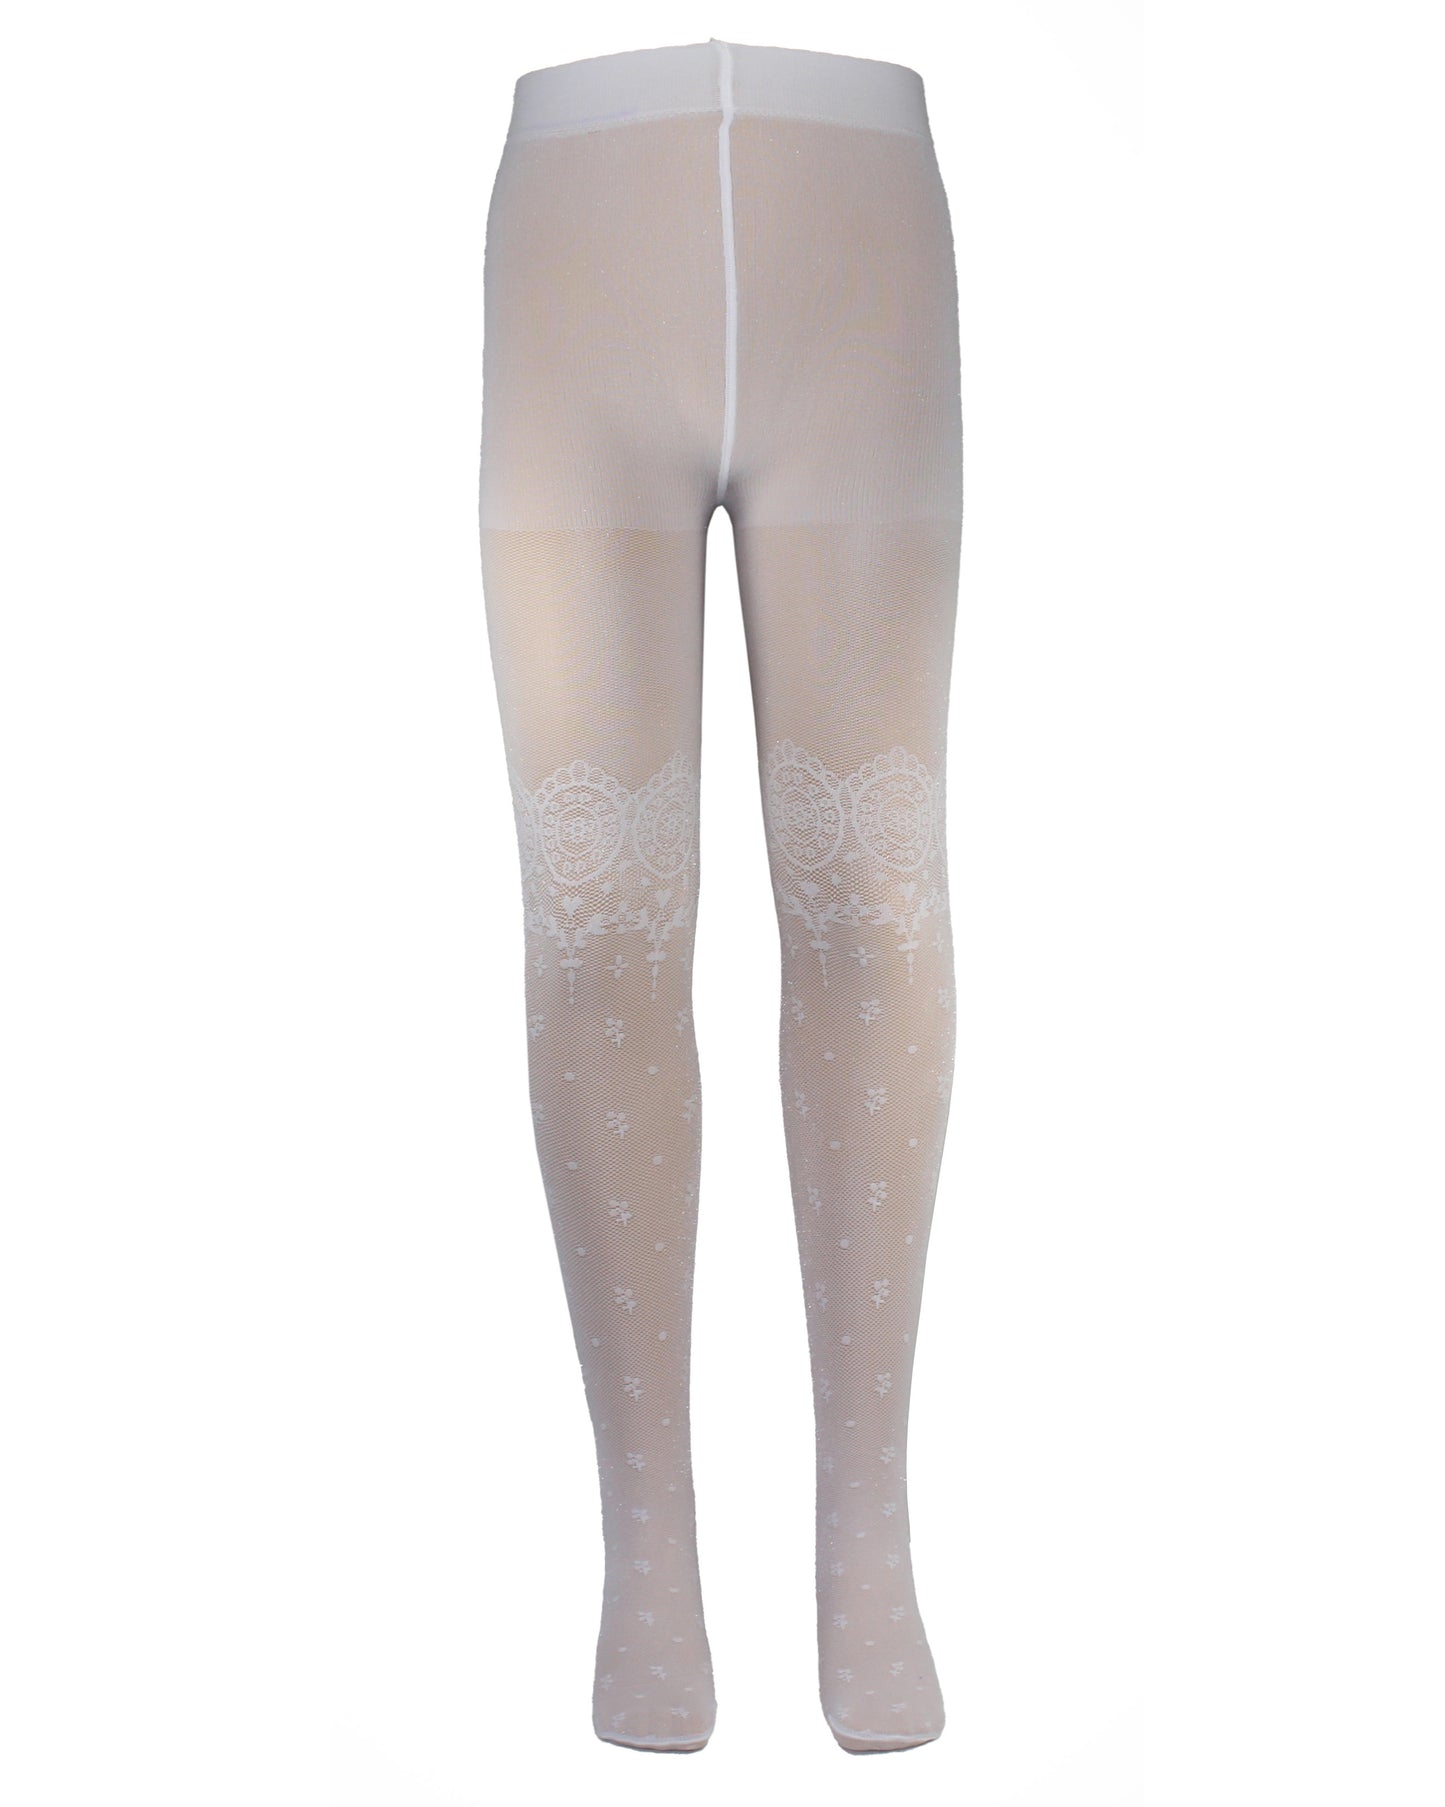 Omsa Cordoba Tights - White semi opaque micro mesh kid's fashion tights with an all over woven flower and spot pattern and circular lace effect over the knee bands, perfect for communion